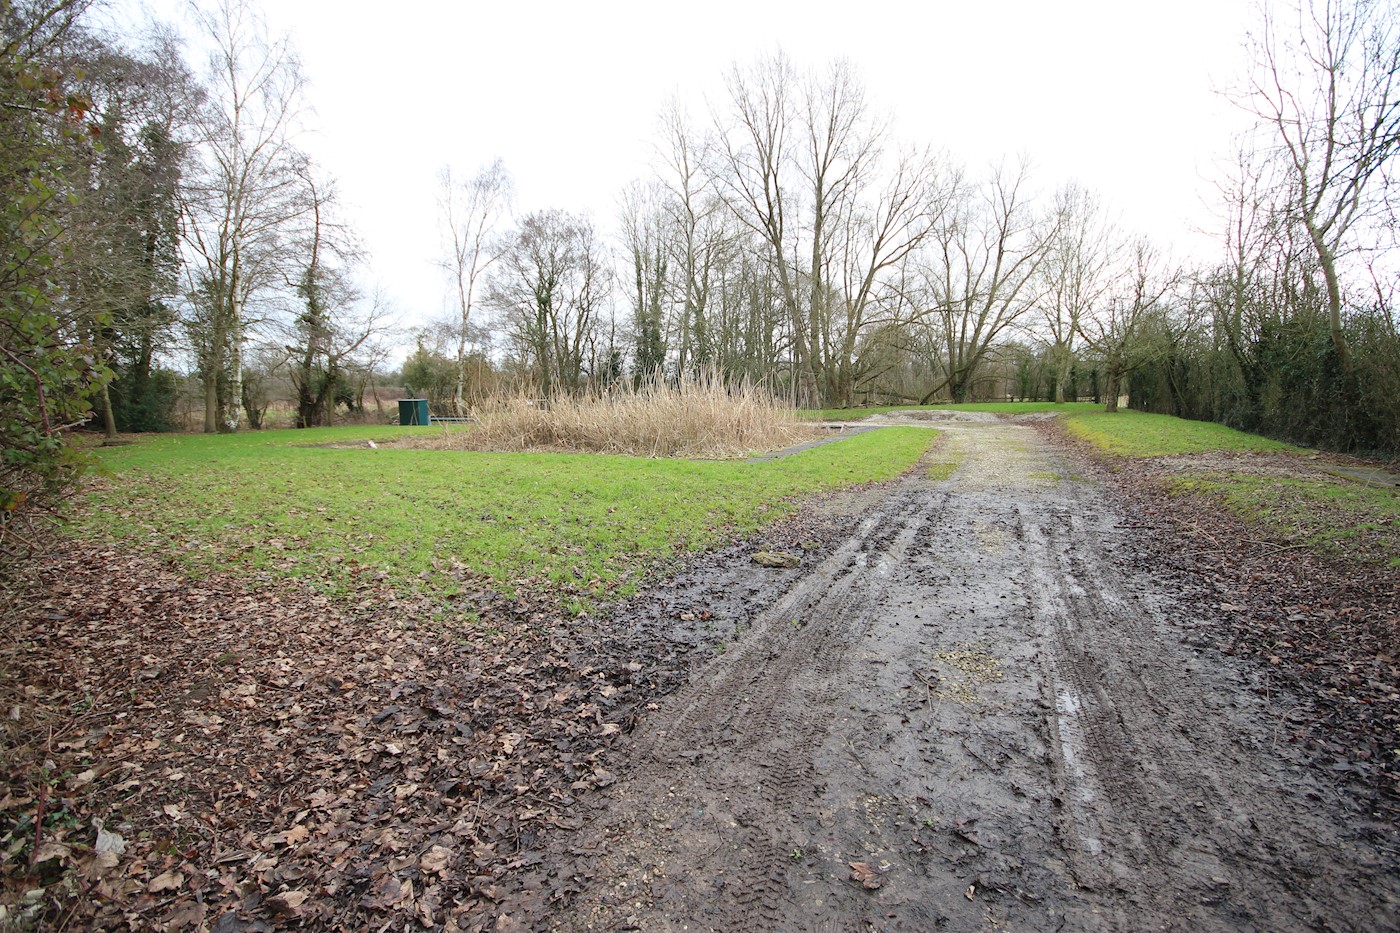 Land on the east side of Ryton End, Barston, Solihull, B92 0LA 1/5